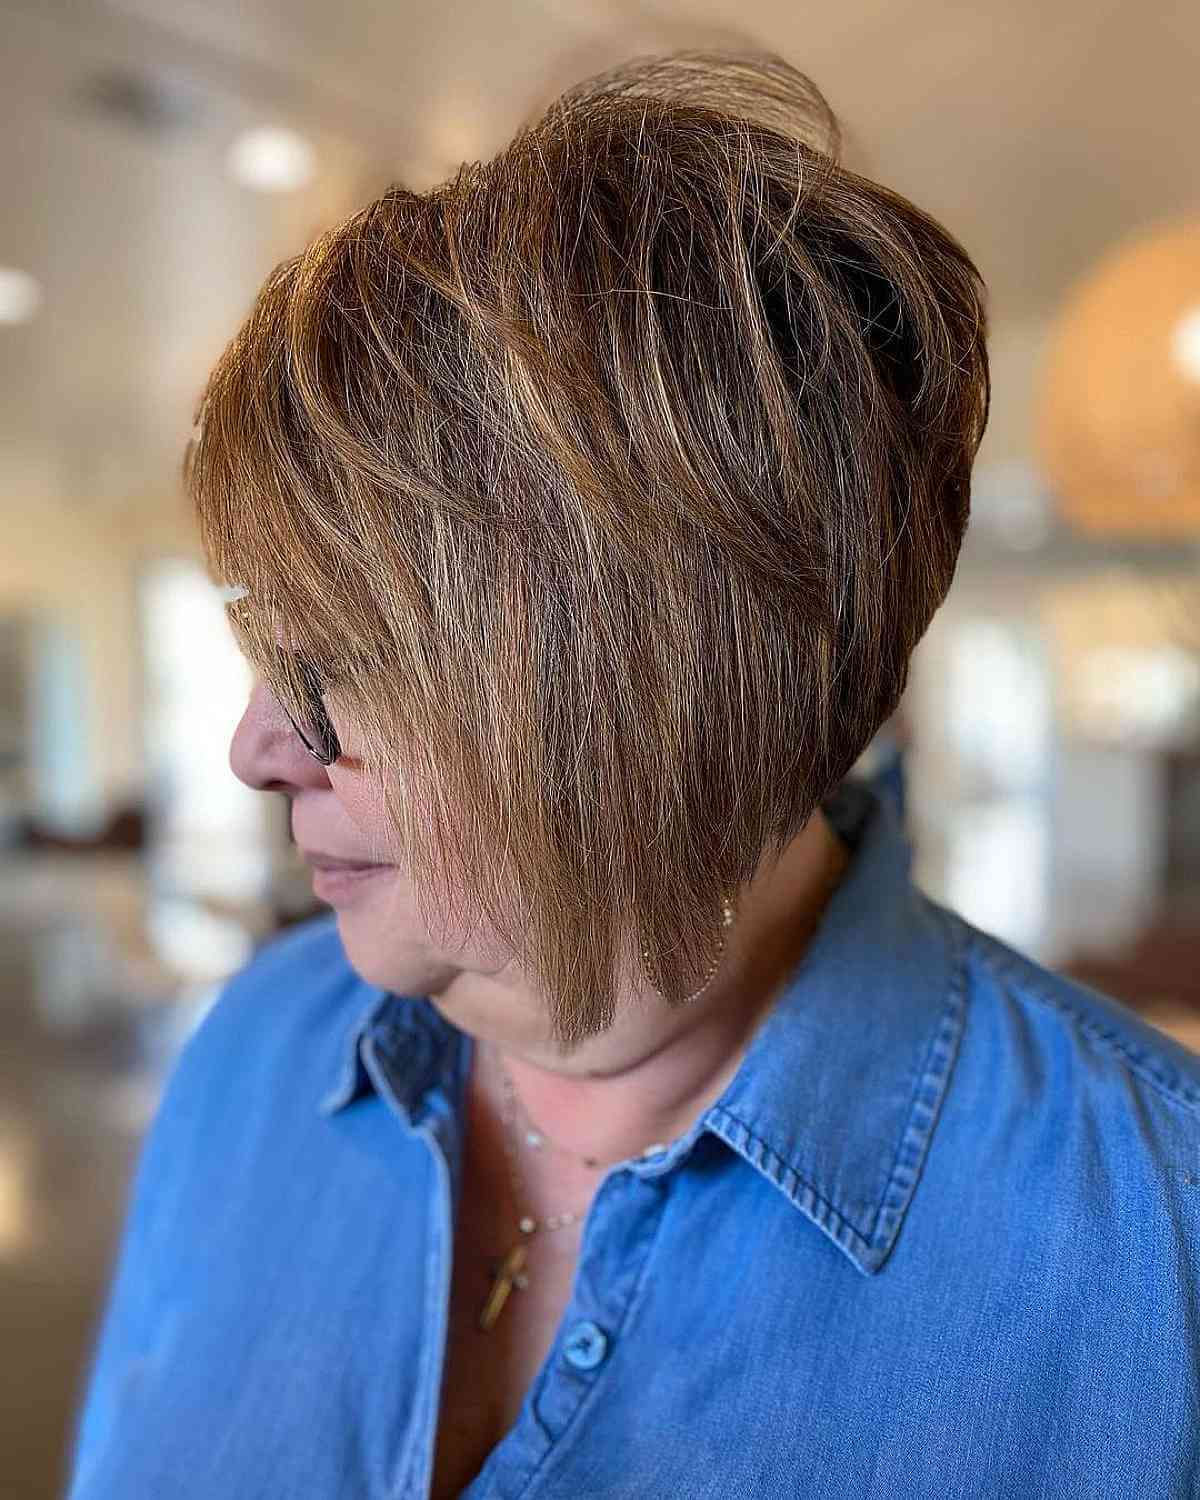 20 Best Hairstyles for Women Over 50 in 2023 - Top Haircuts for Older Women